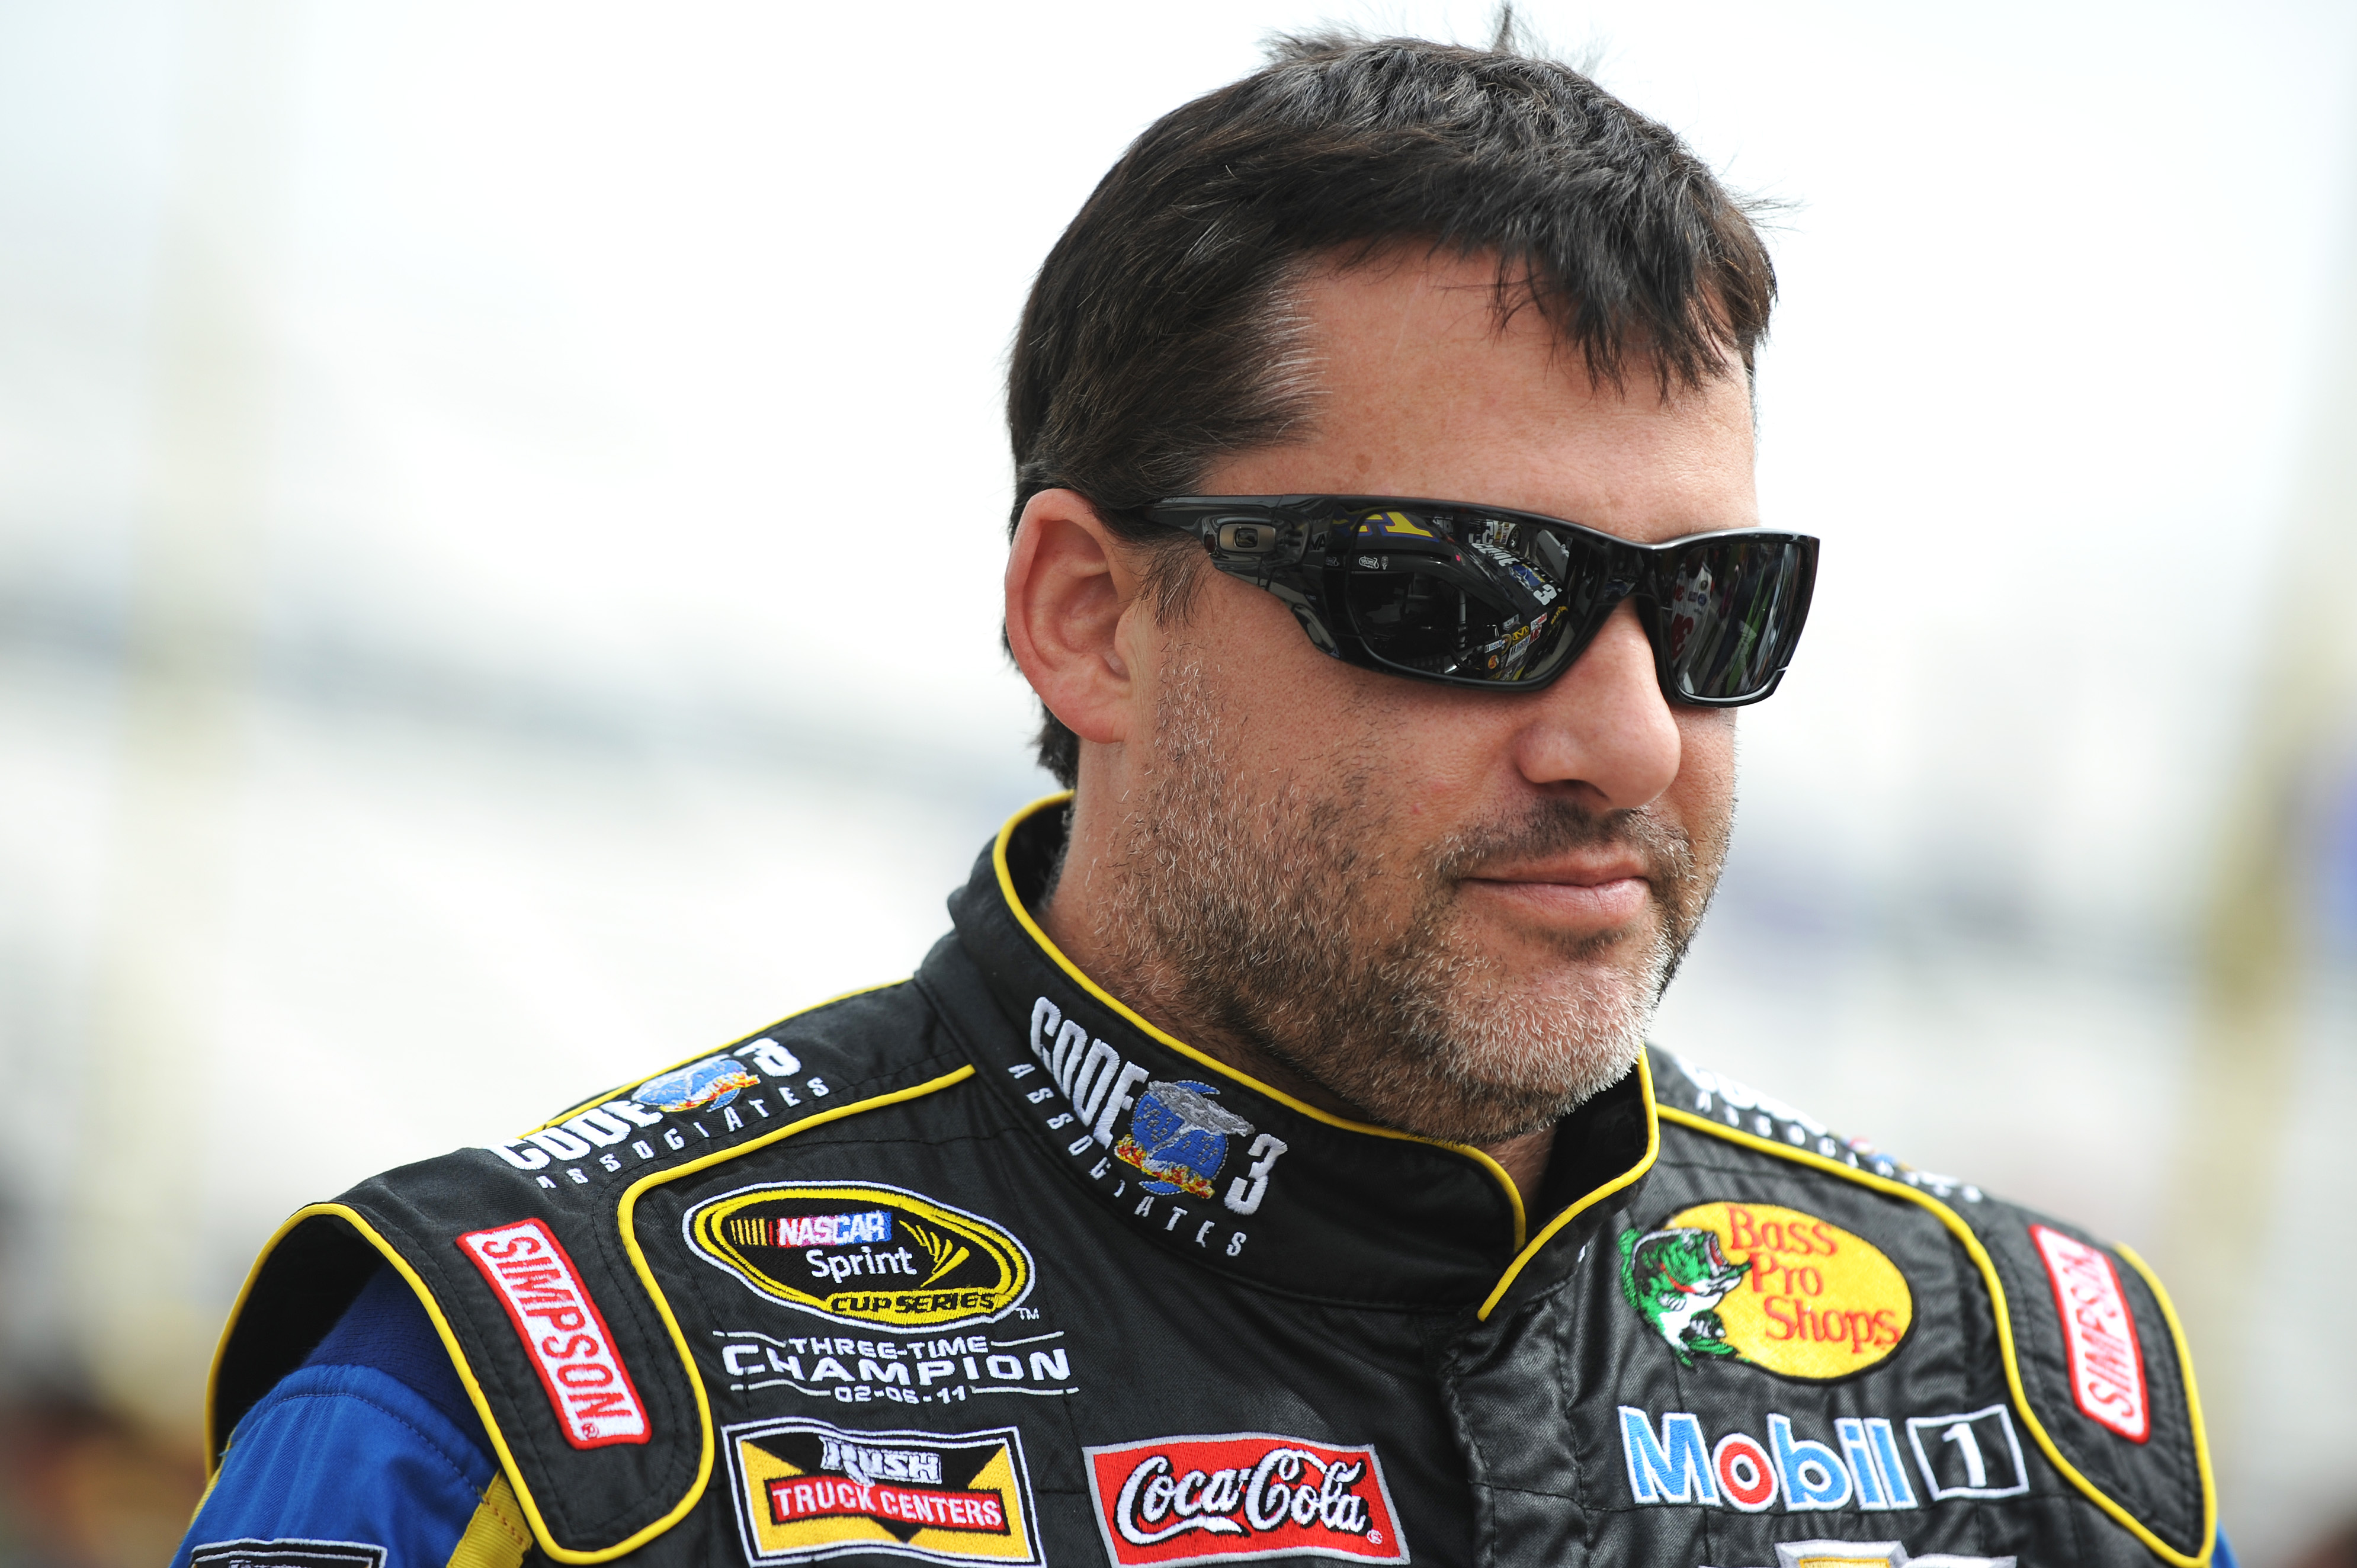 Tony Stewart has elected to sit out this weekend's race at Michigan.